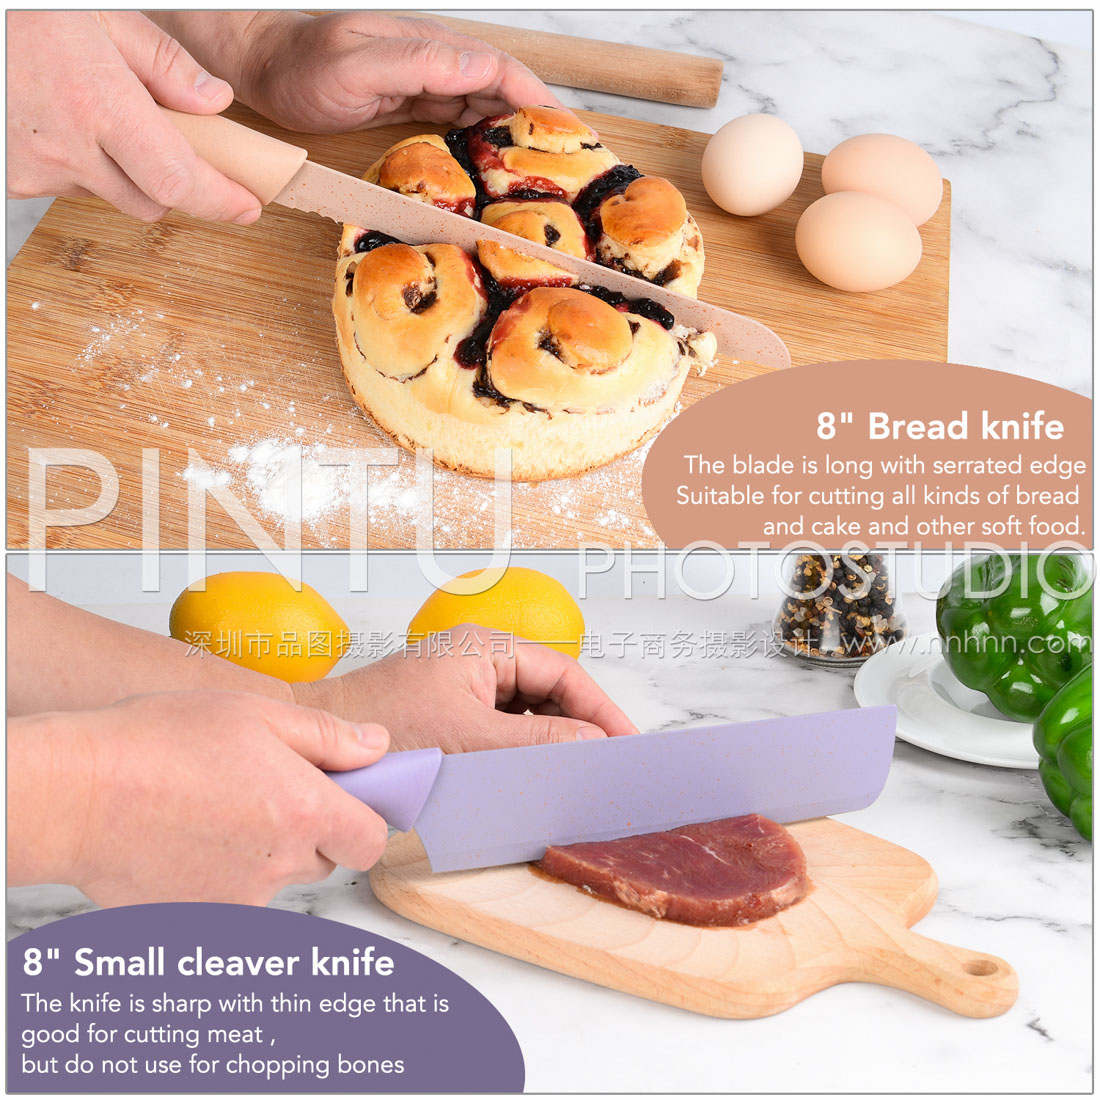 The best Amazon product photography in China Lifestyle kitchen knife bread / beef